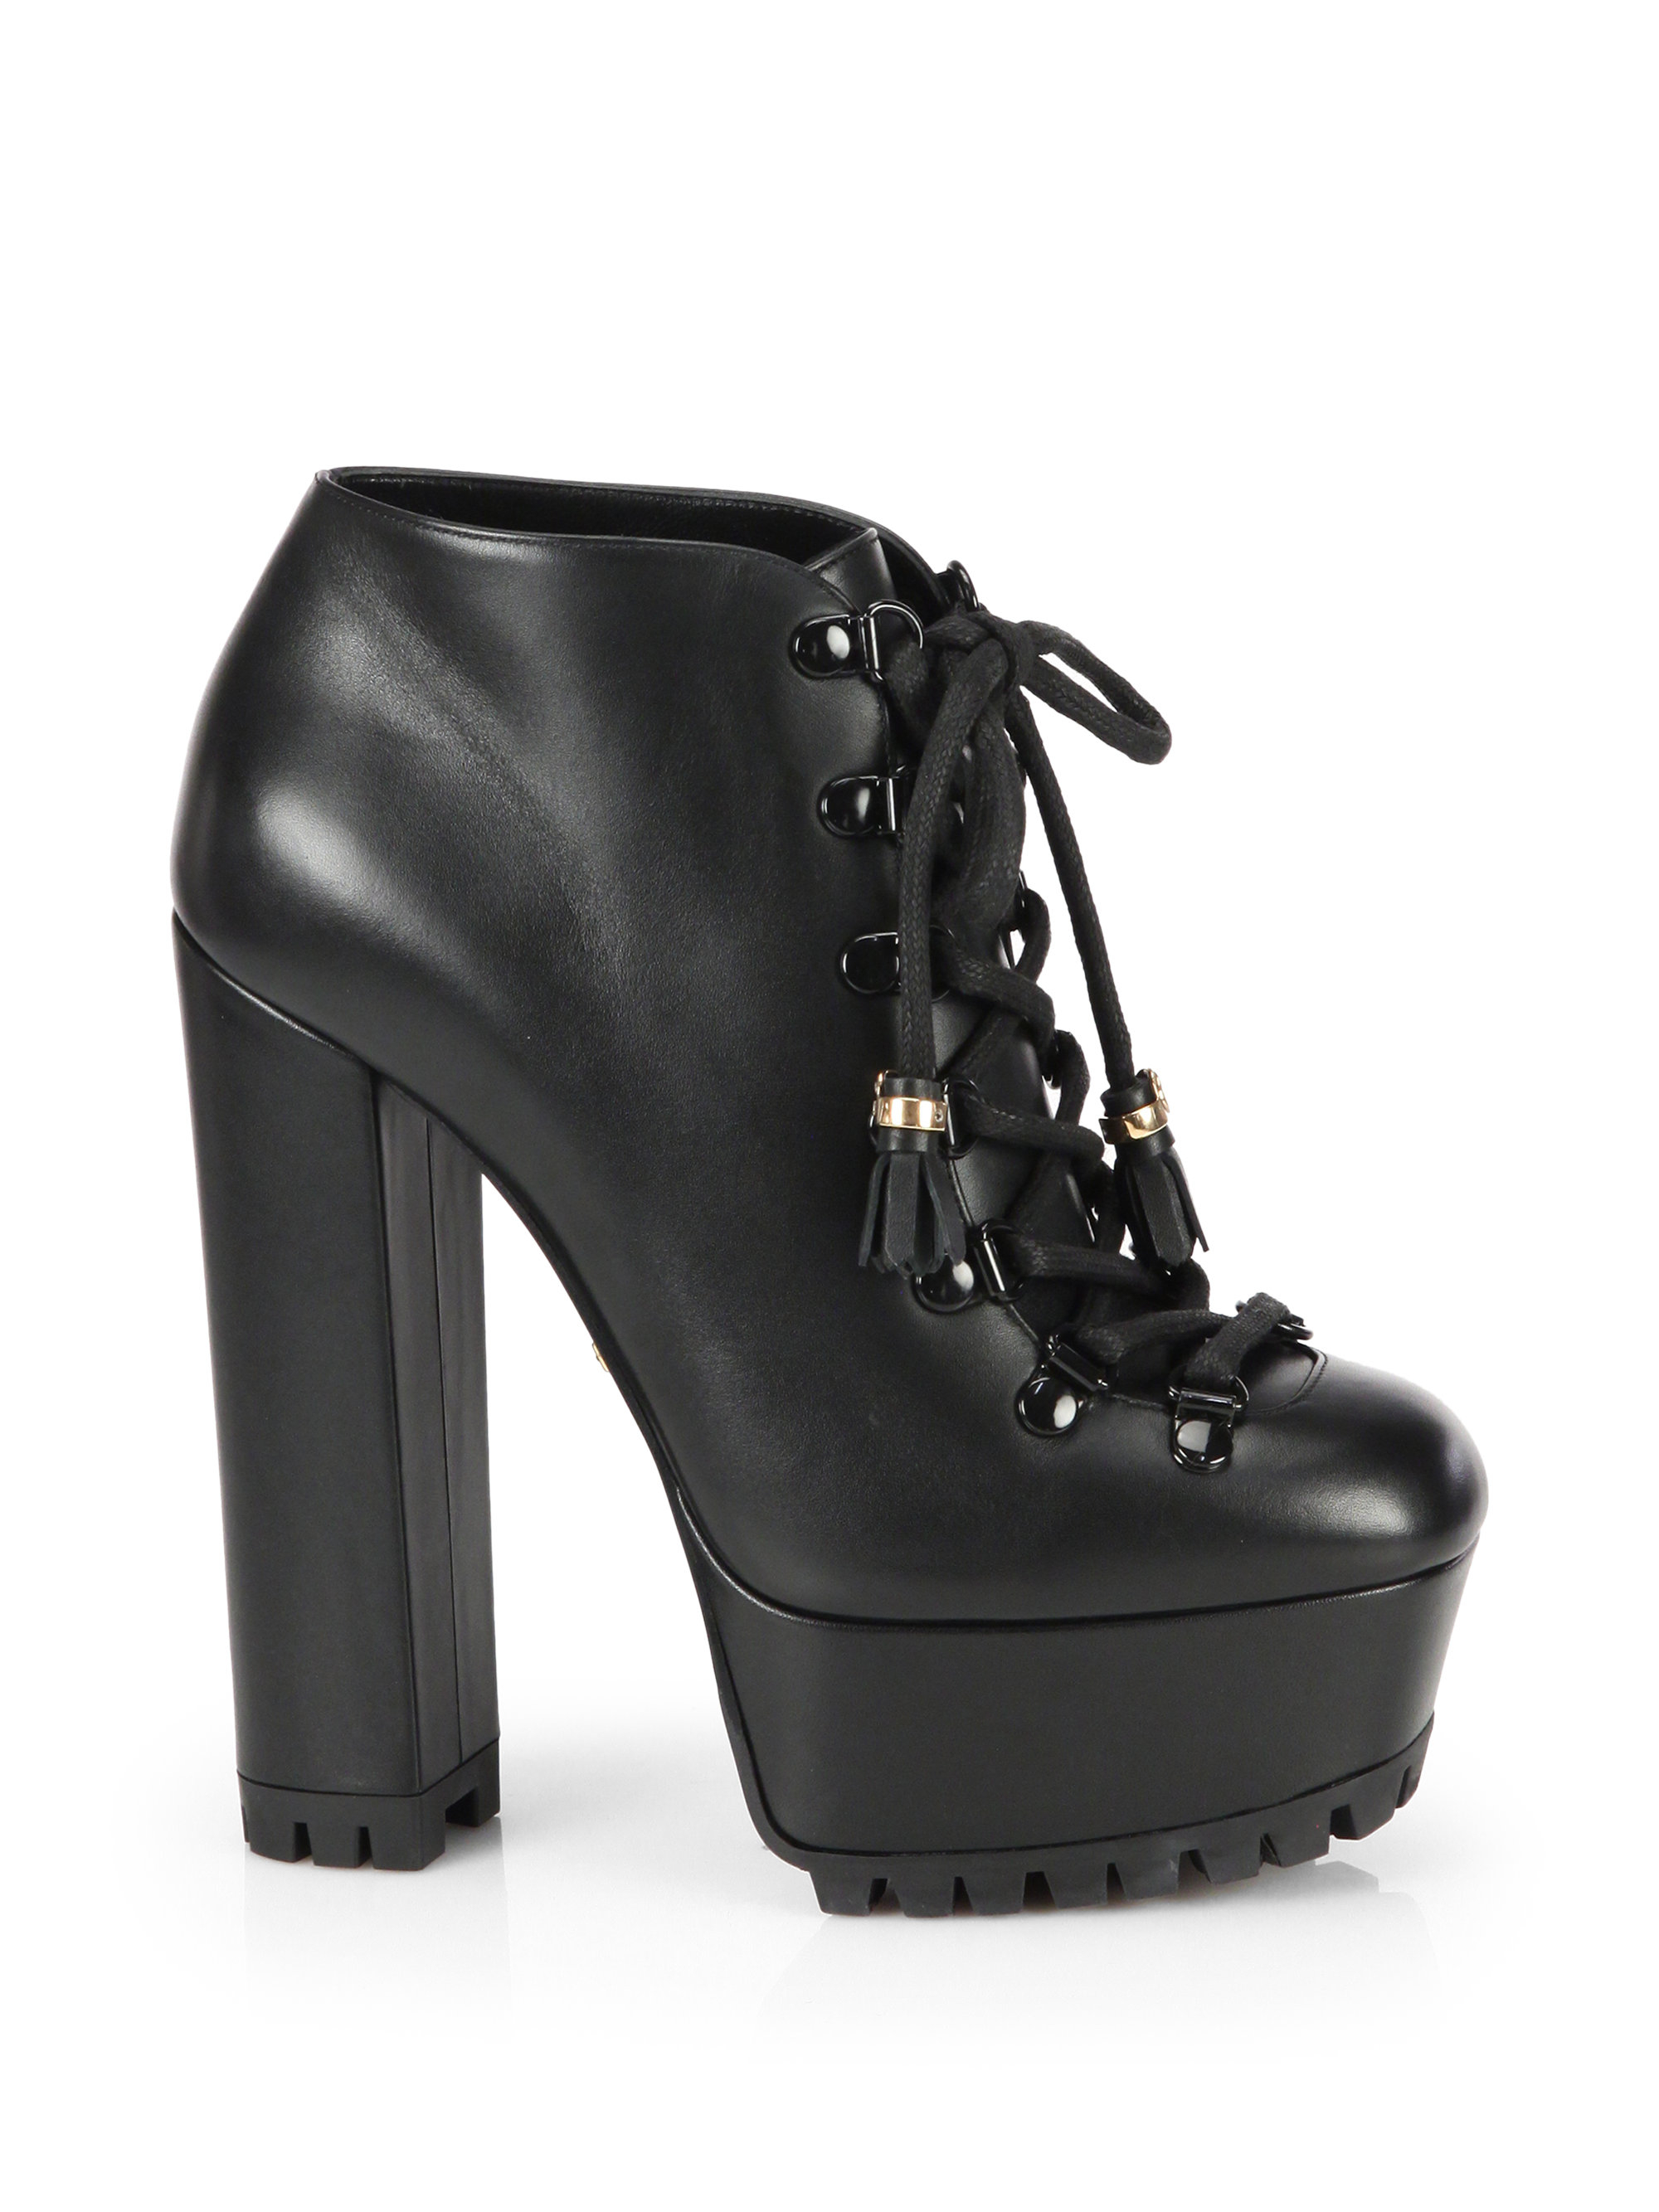 Gucci Kayla Lace-Up Leather Platform Ankle Boots in Black - Lyst